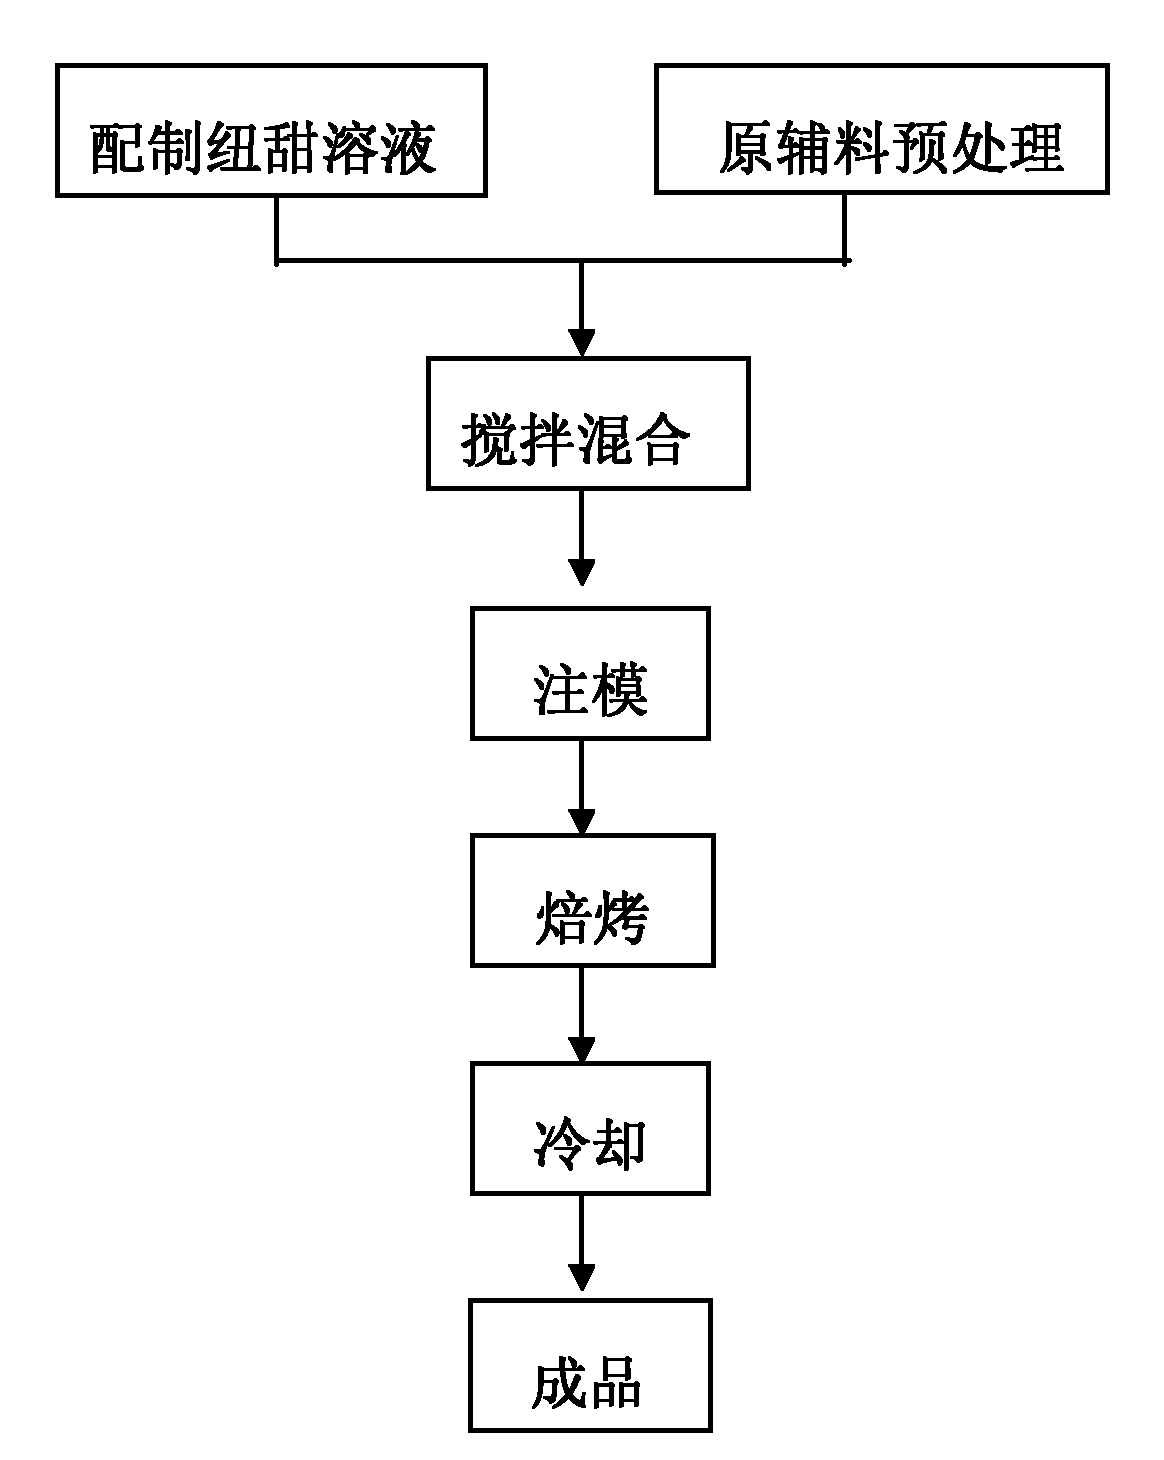 Cake containing neotame and preparation method thereof